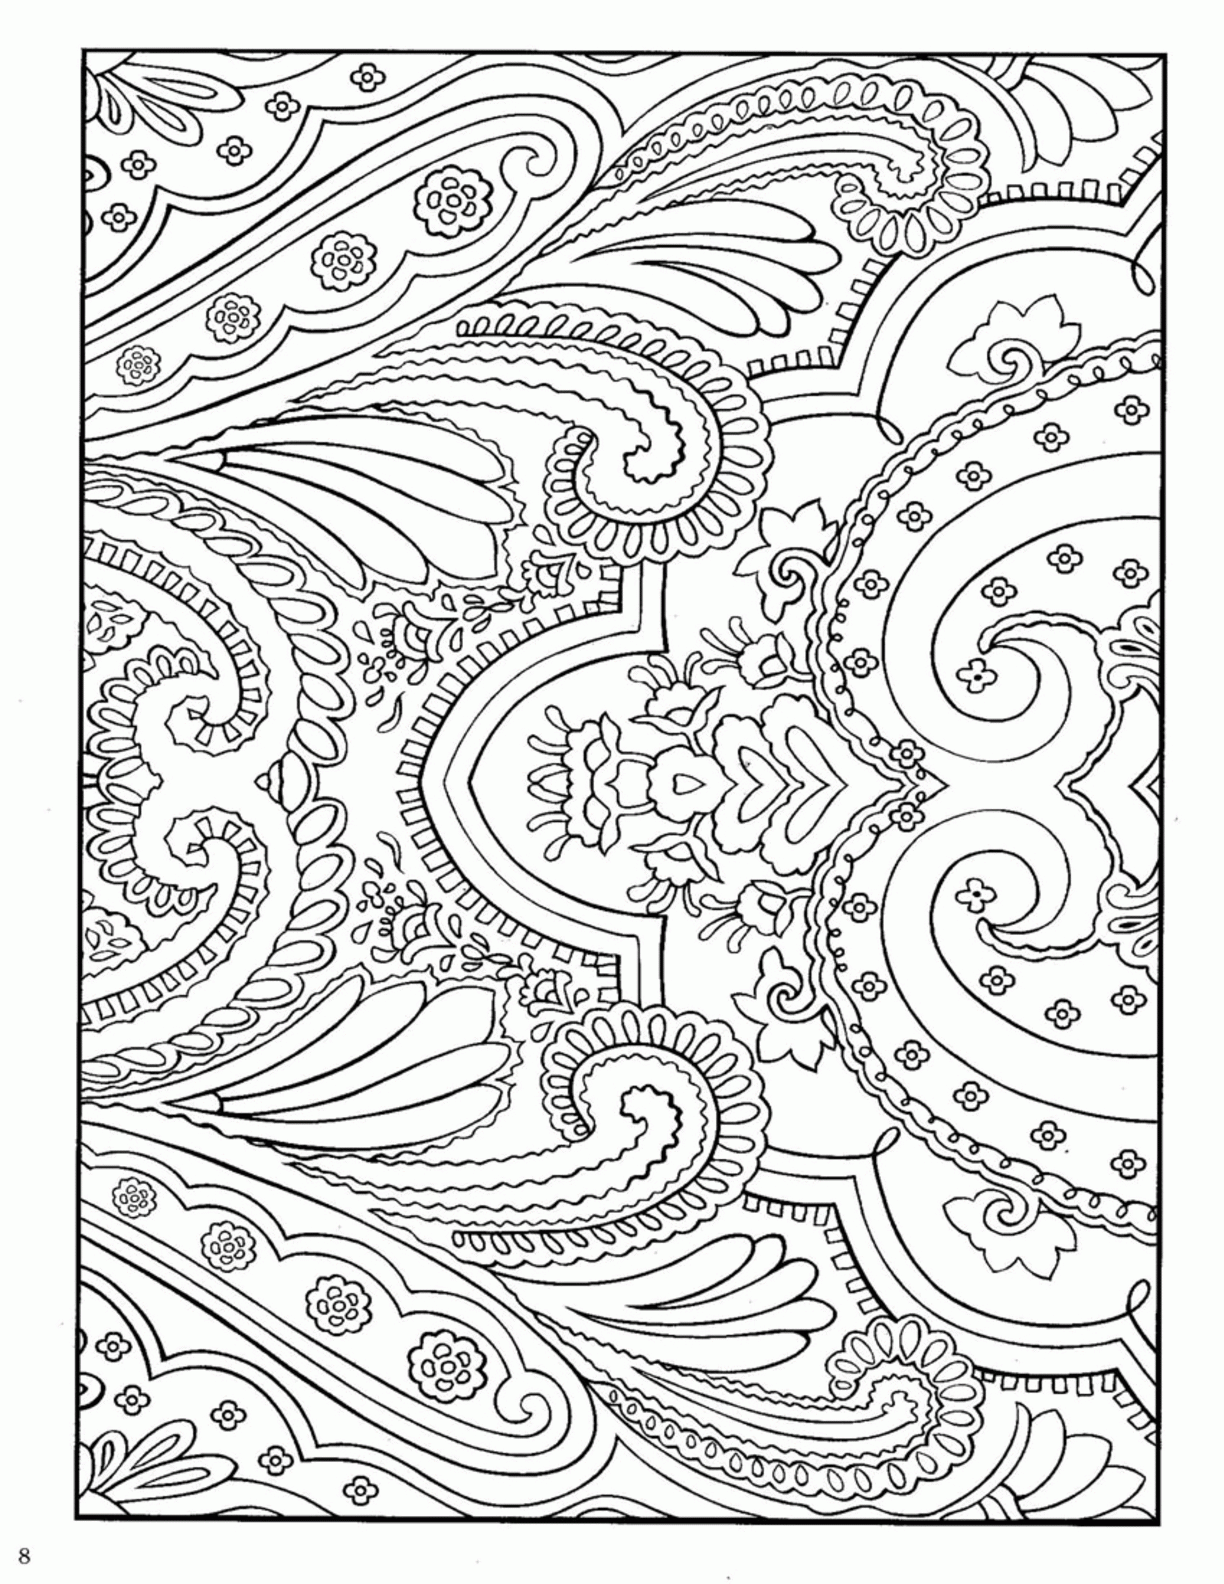 Paisley Coloring Pages Printable - Coloring Home